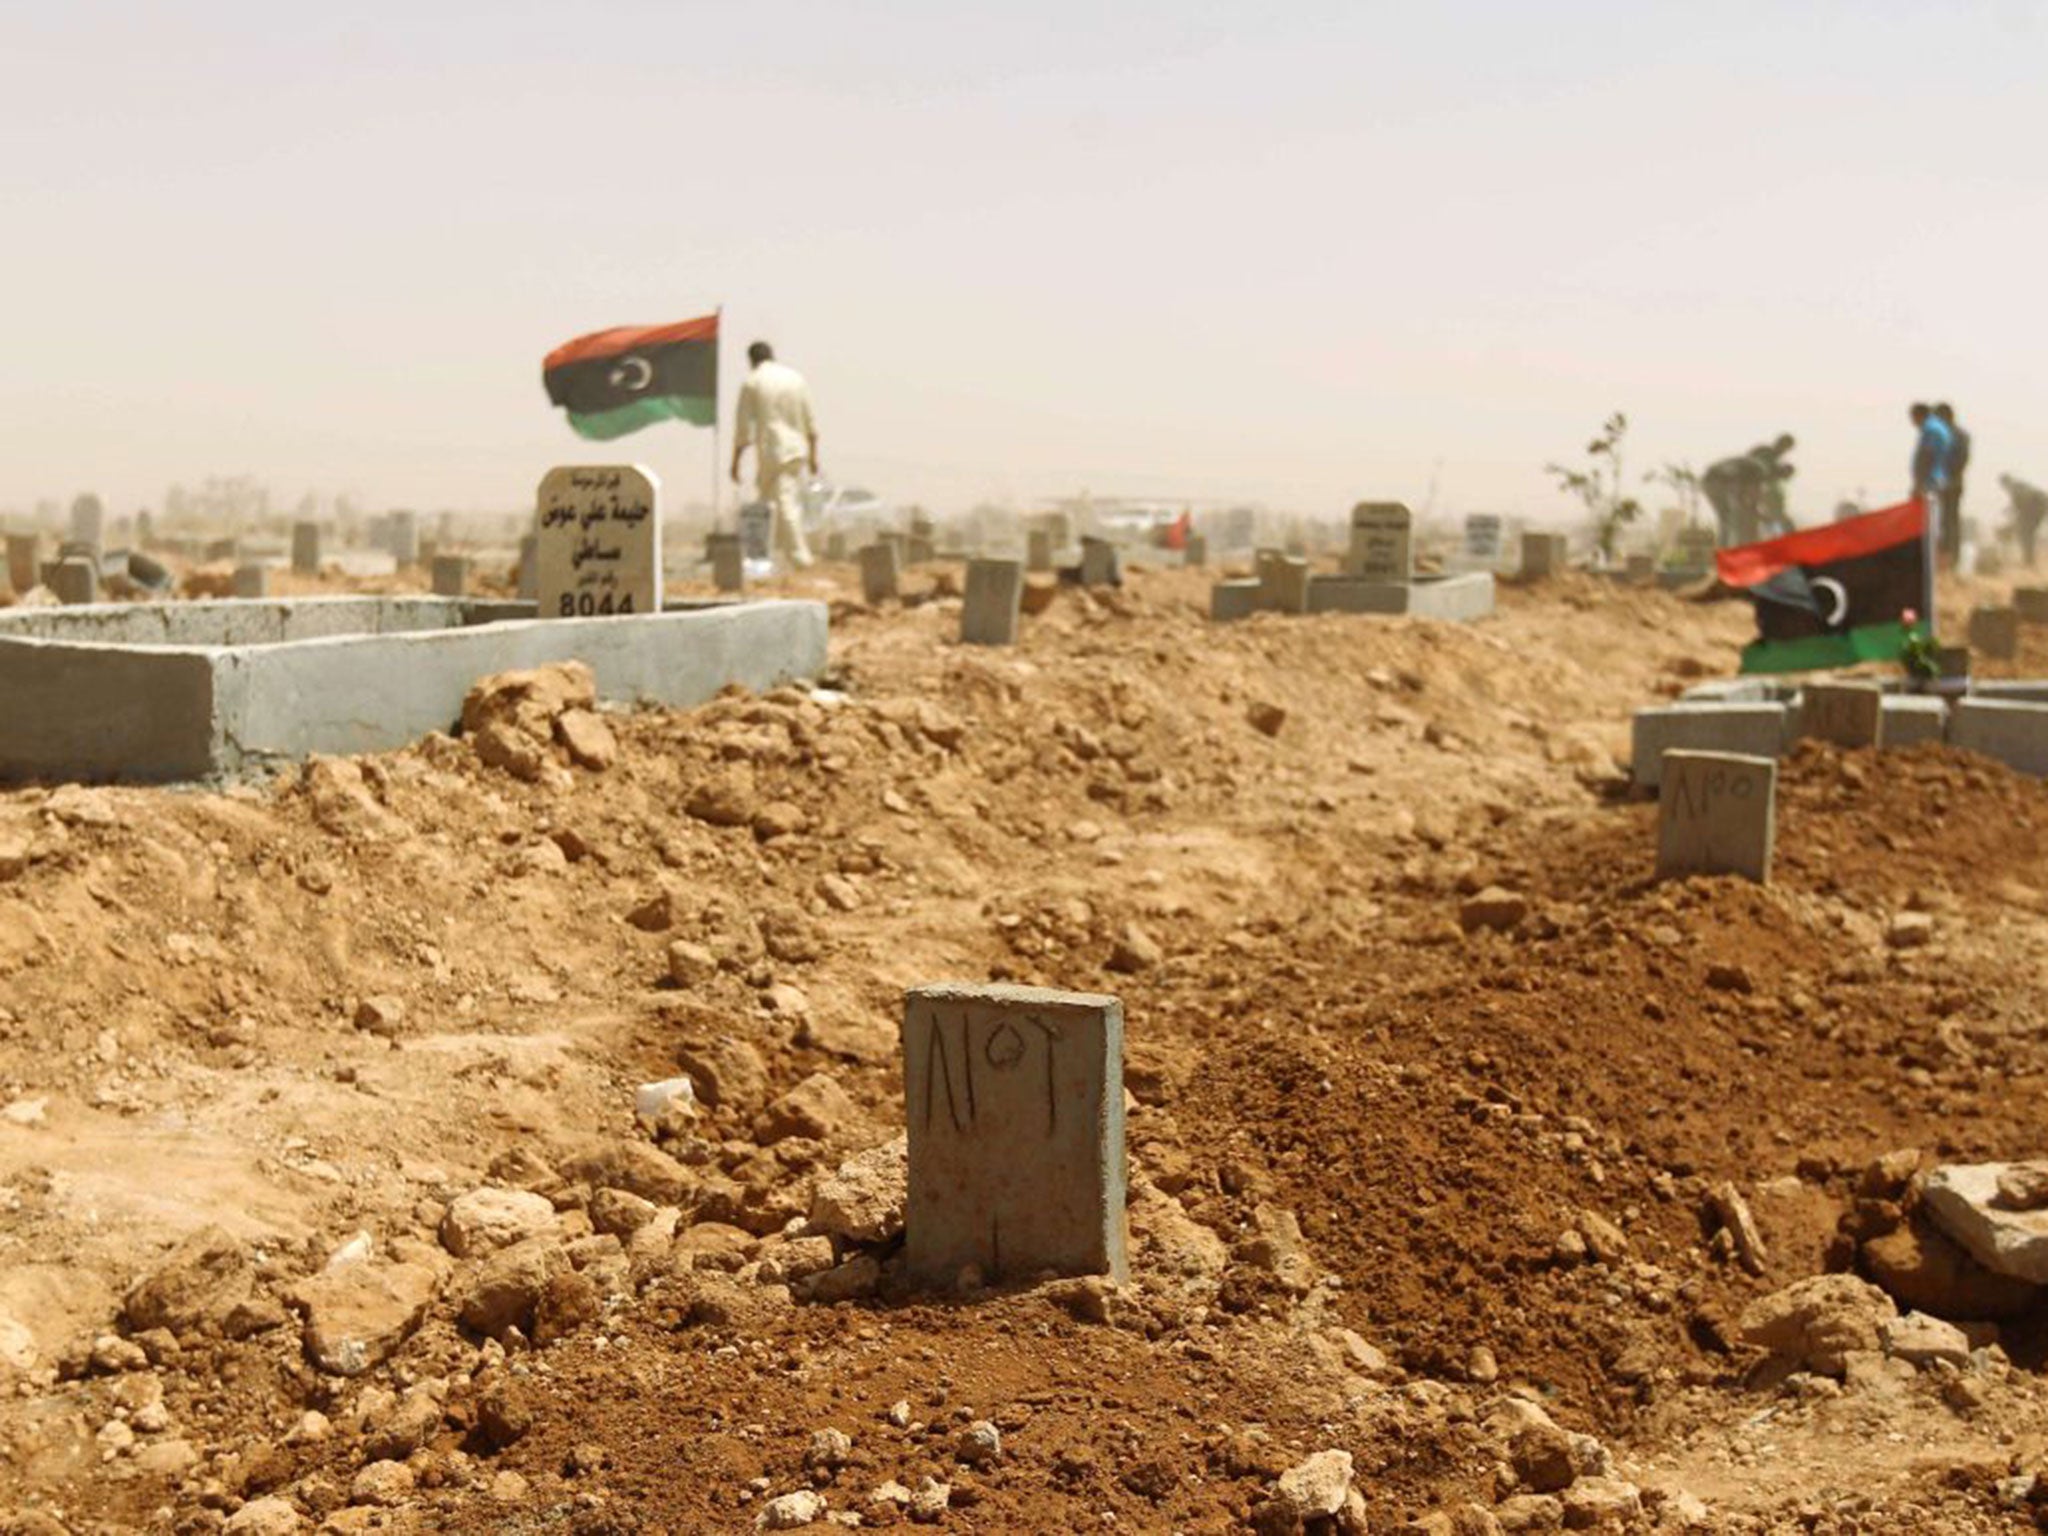 The grave of Libyan human rights activist and lawyer Salwa Bugaighis outside Benghazi